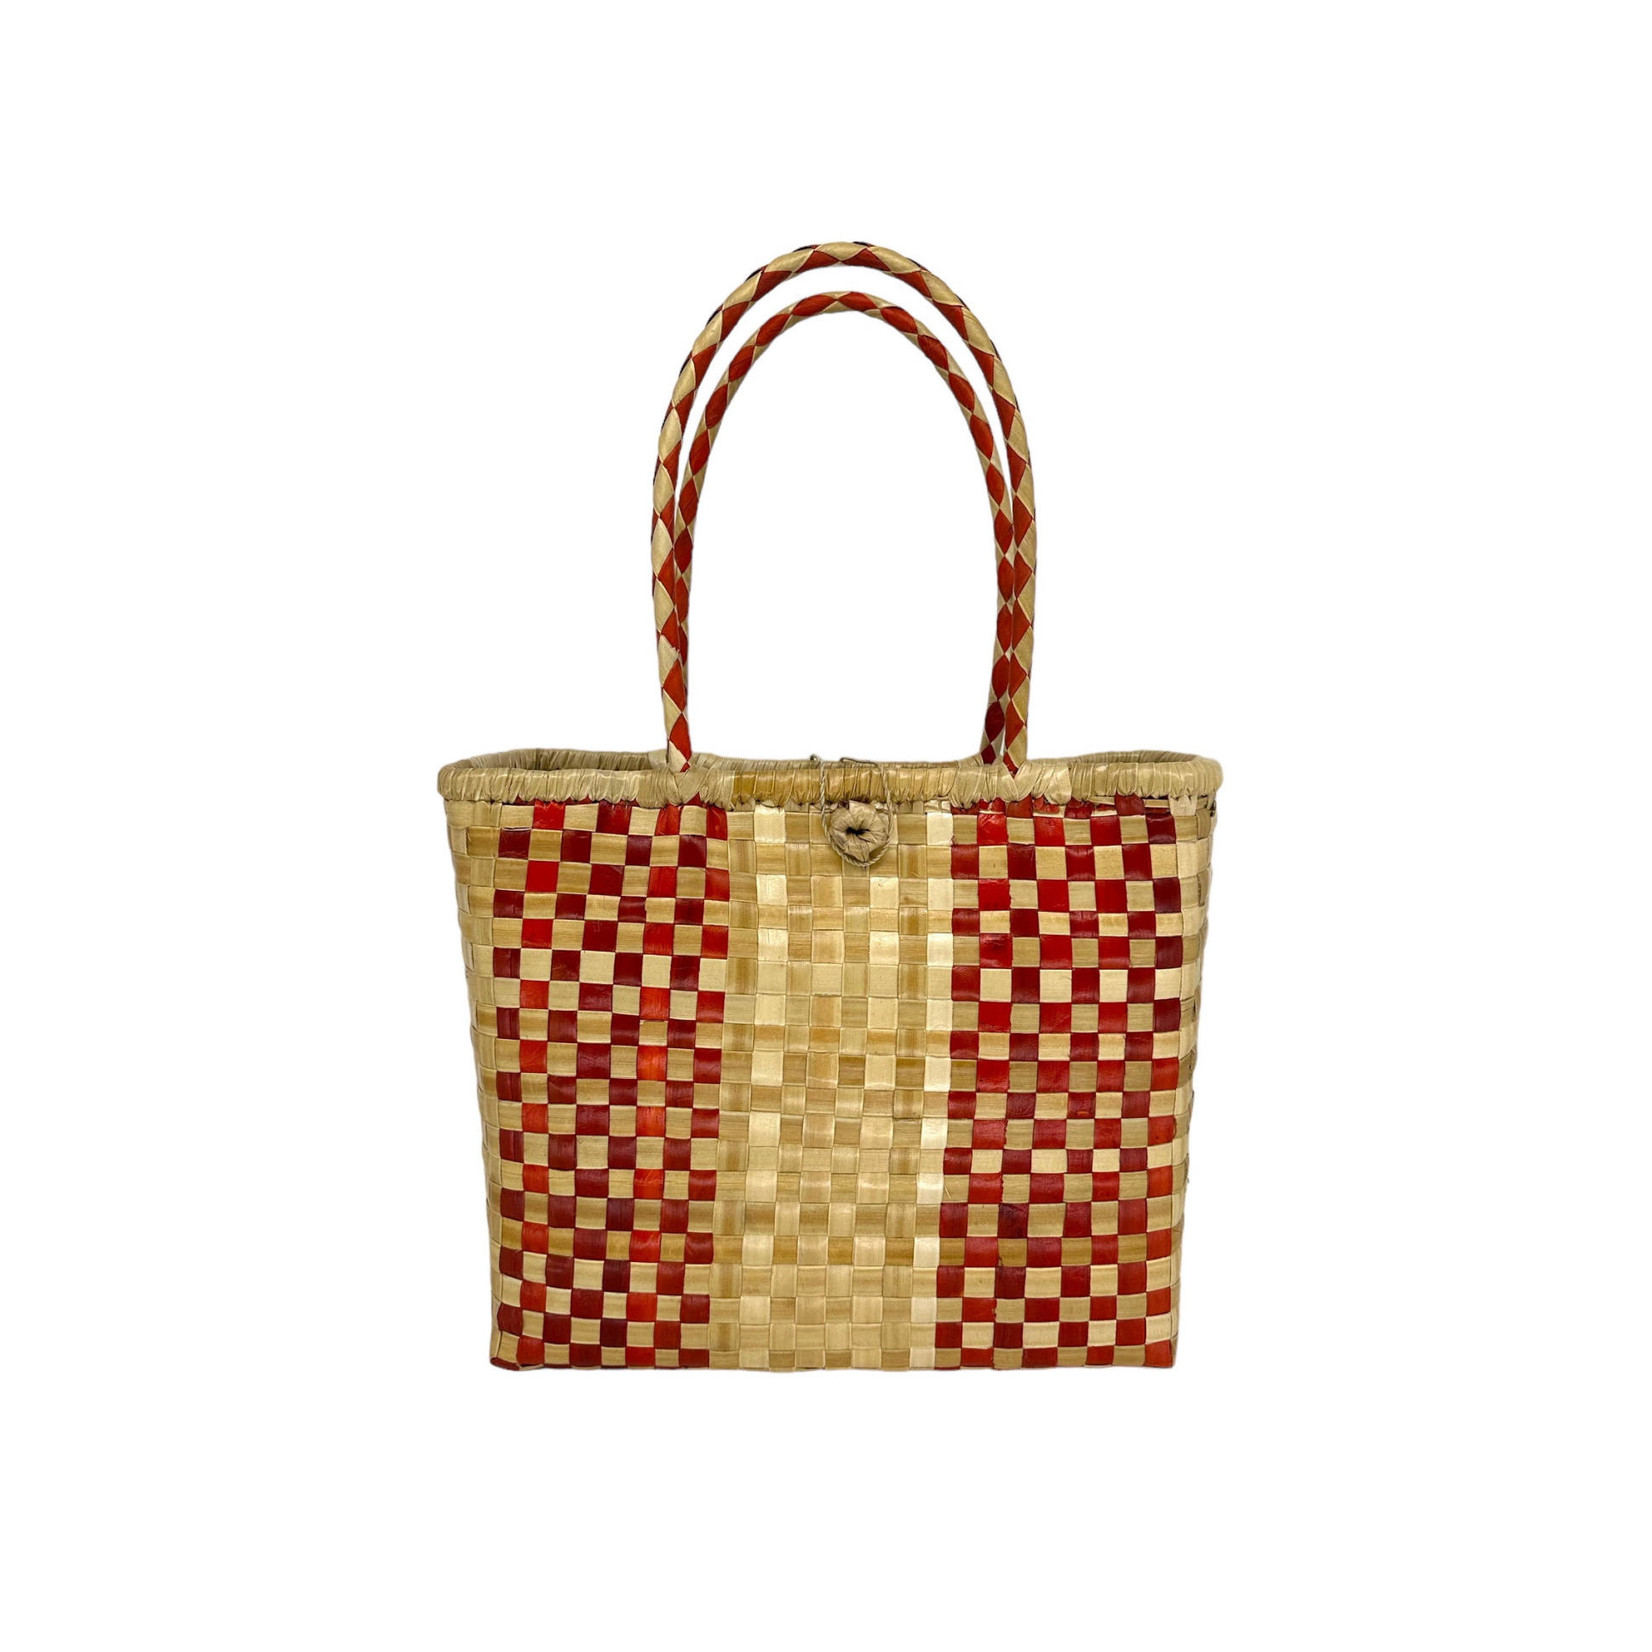 Two Tone Woven Lauhala Hula Bag Hapu'u *AVAILABLE IN 4 SIZES*